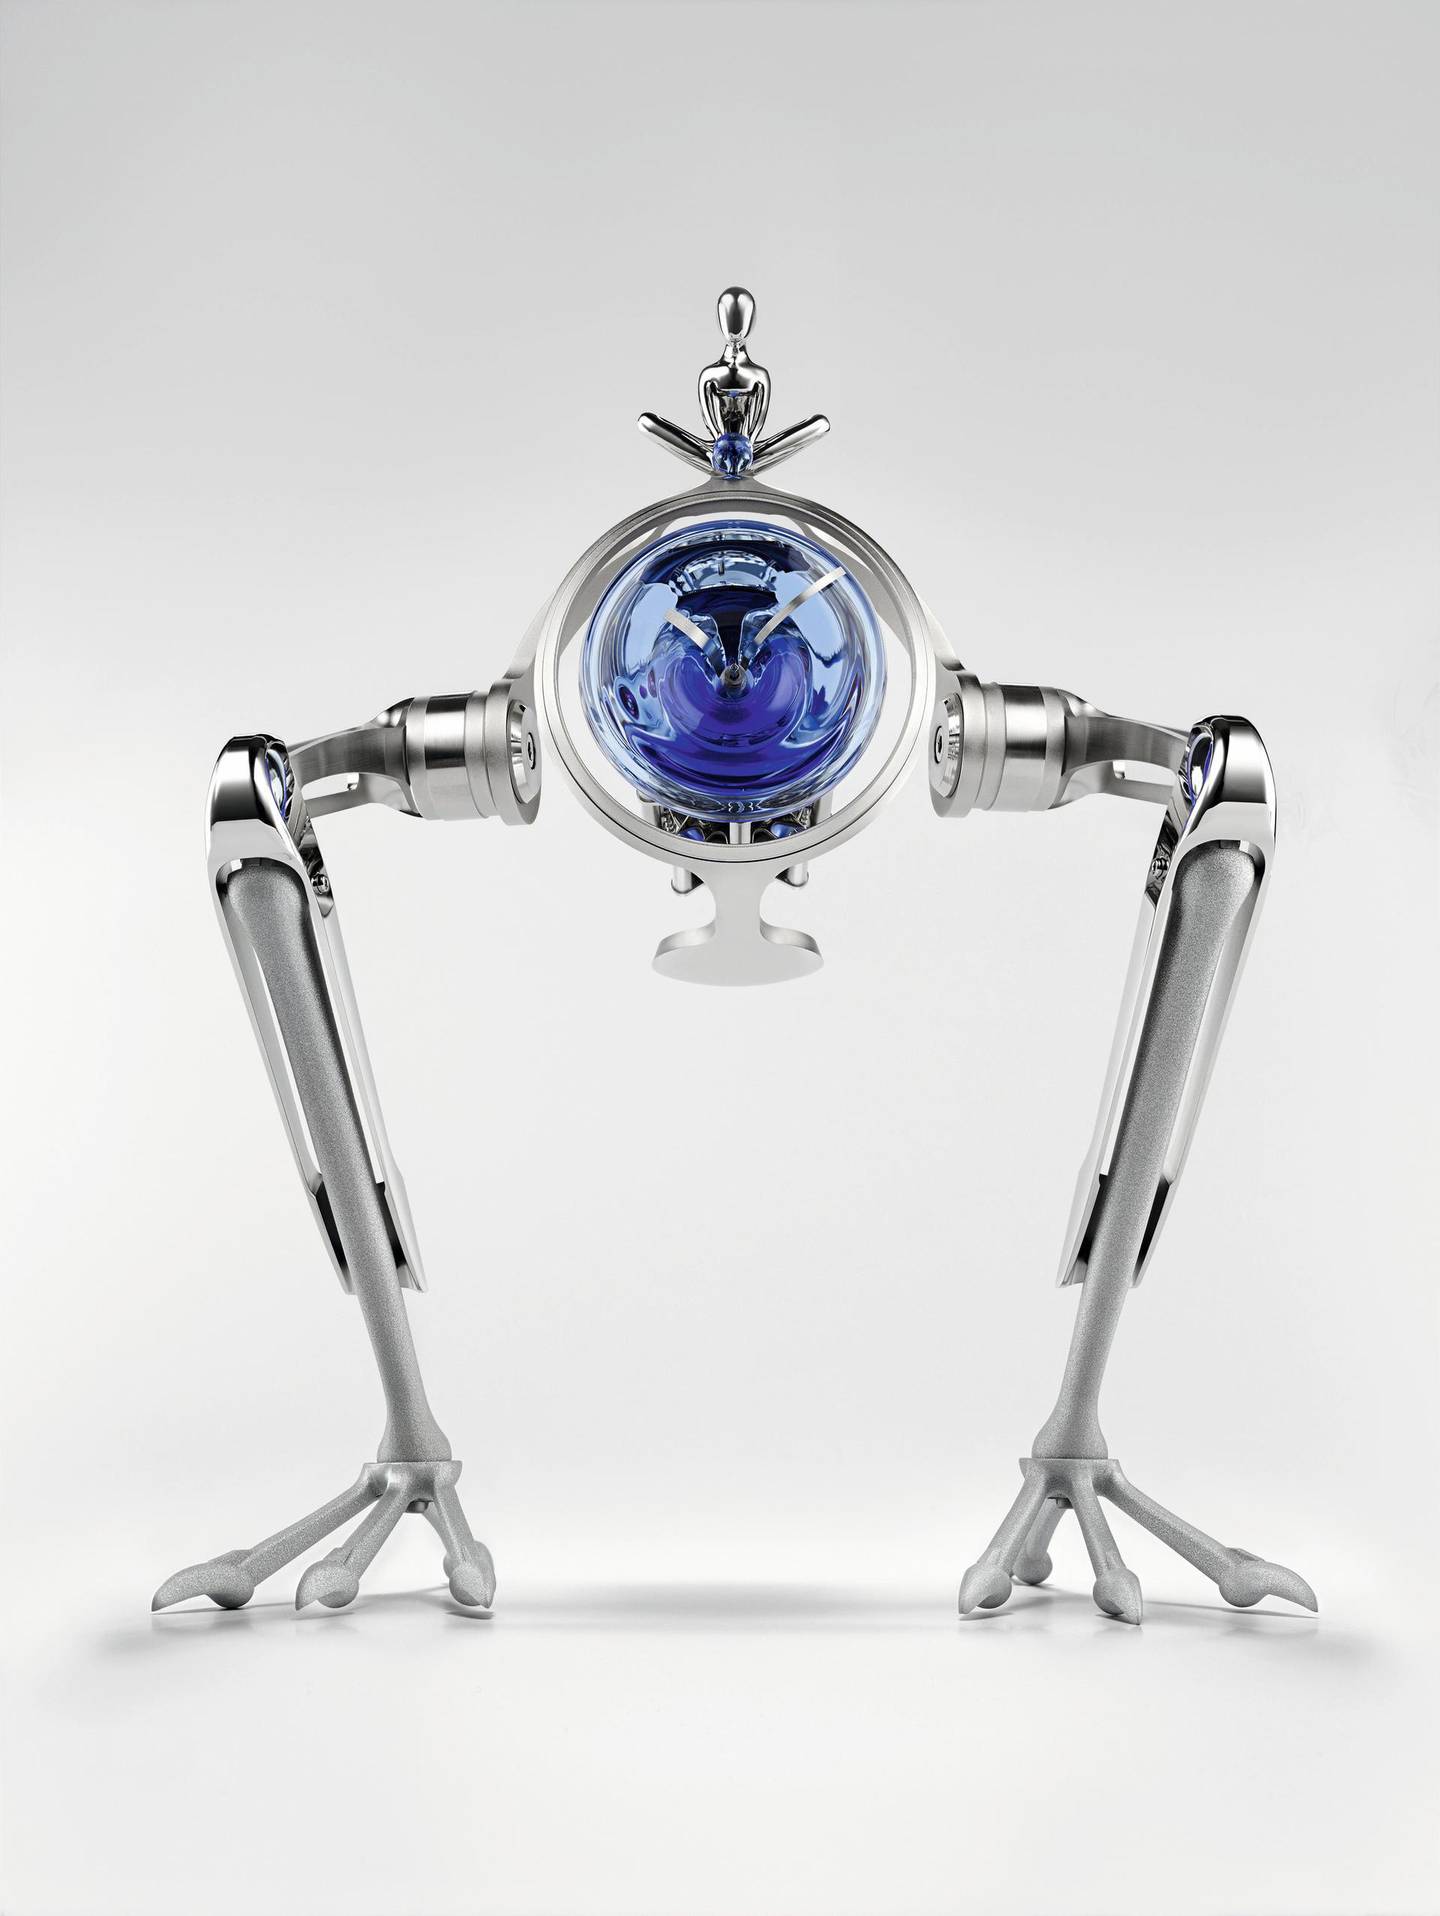 An MB&F watch for the Only Watch 2019 auction, which will be on display at Christie's Dubai from October 1 to 3